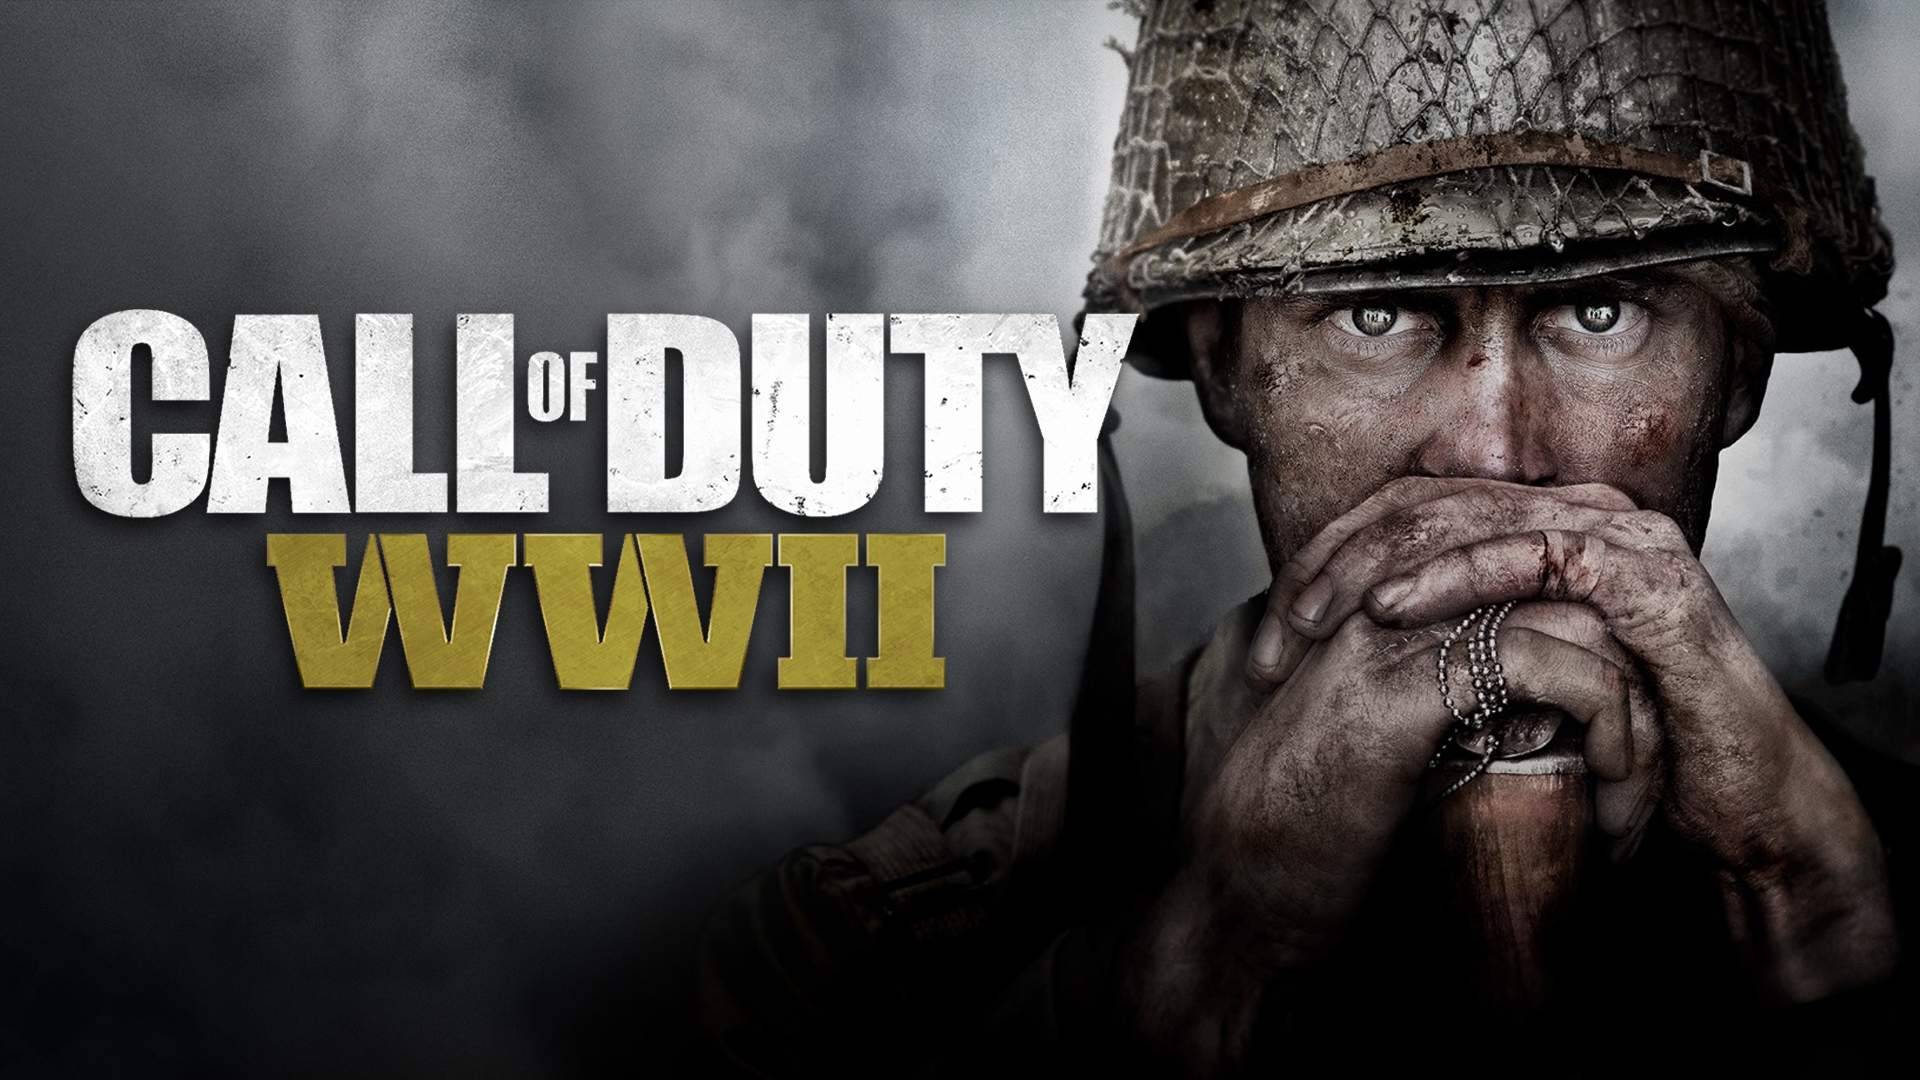 Call of Duty: WWII.